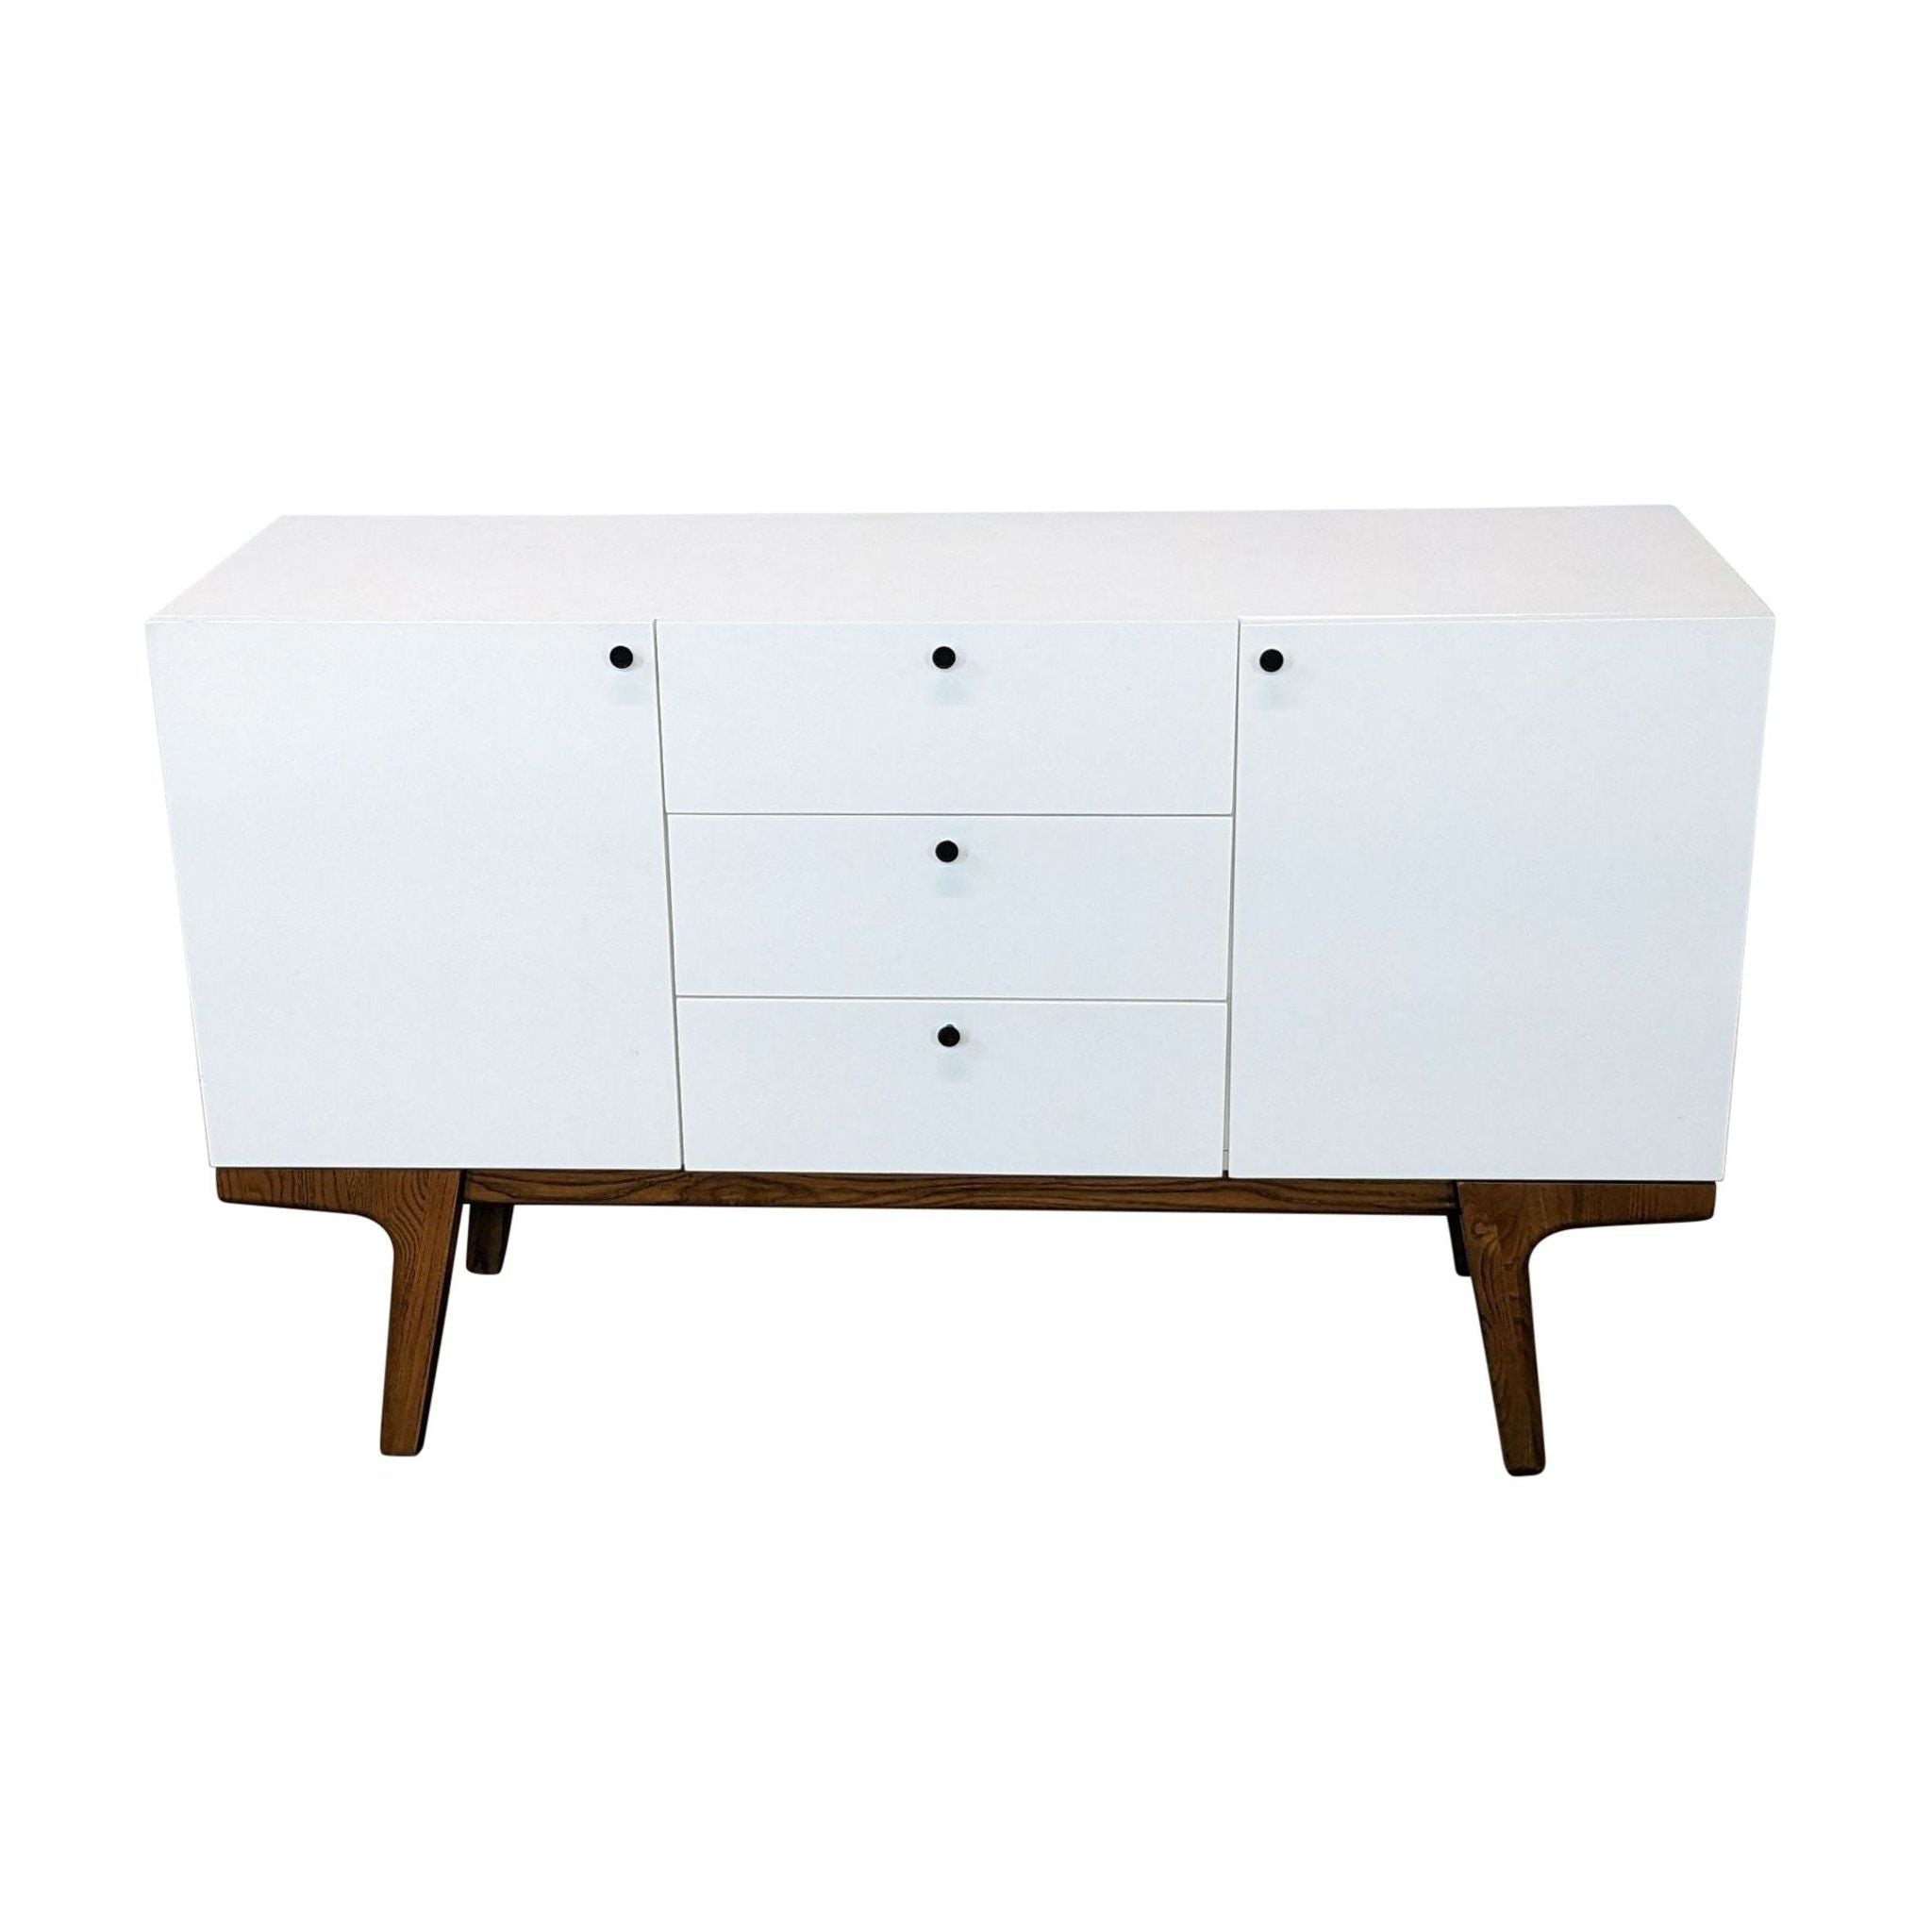 West Elm Scandinavian-style entertainment center with three drawers and solid wood legs, closed view.